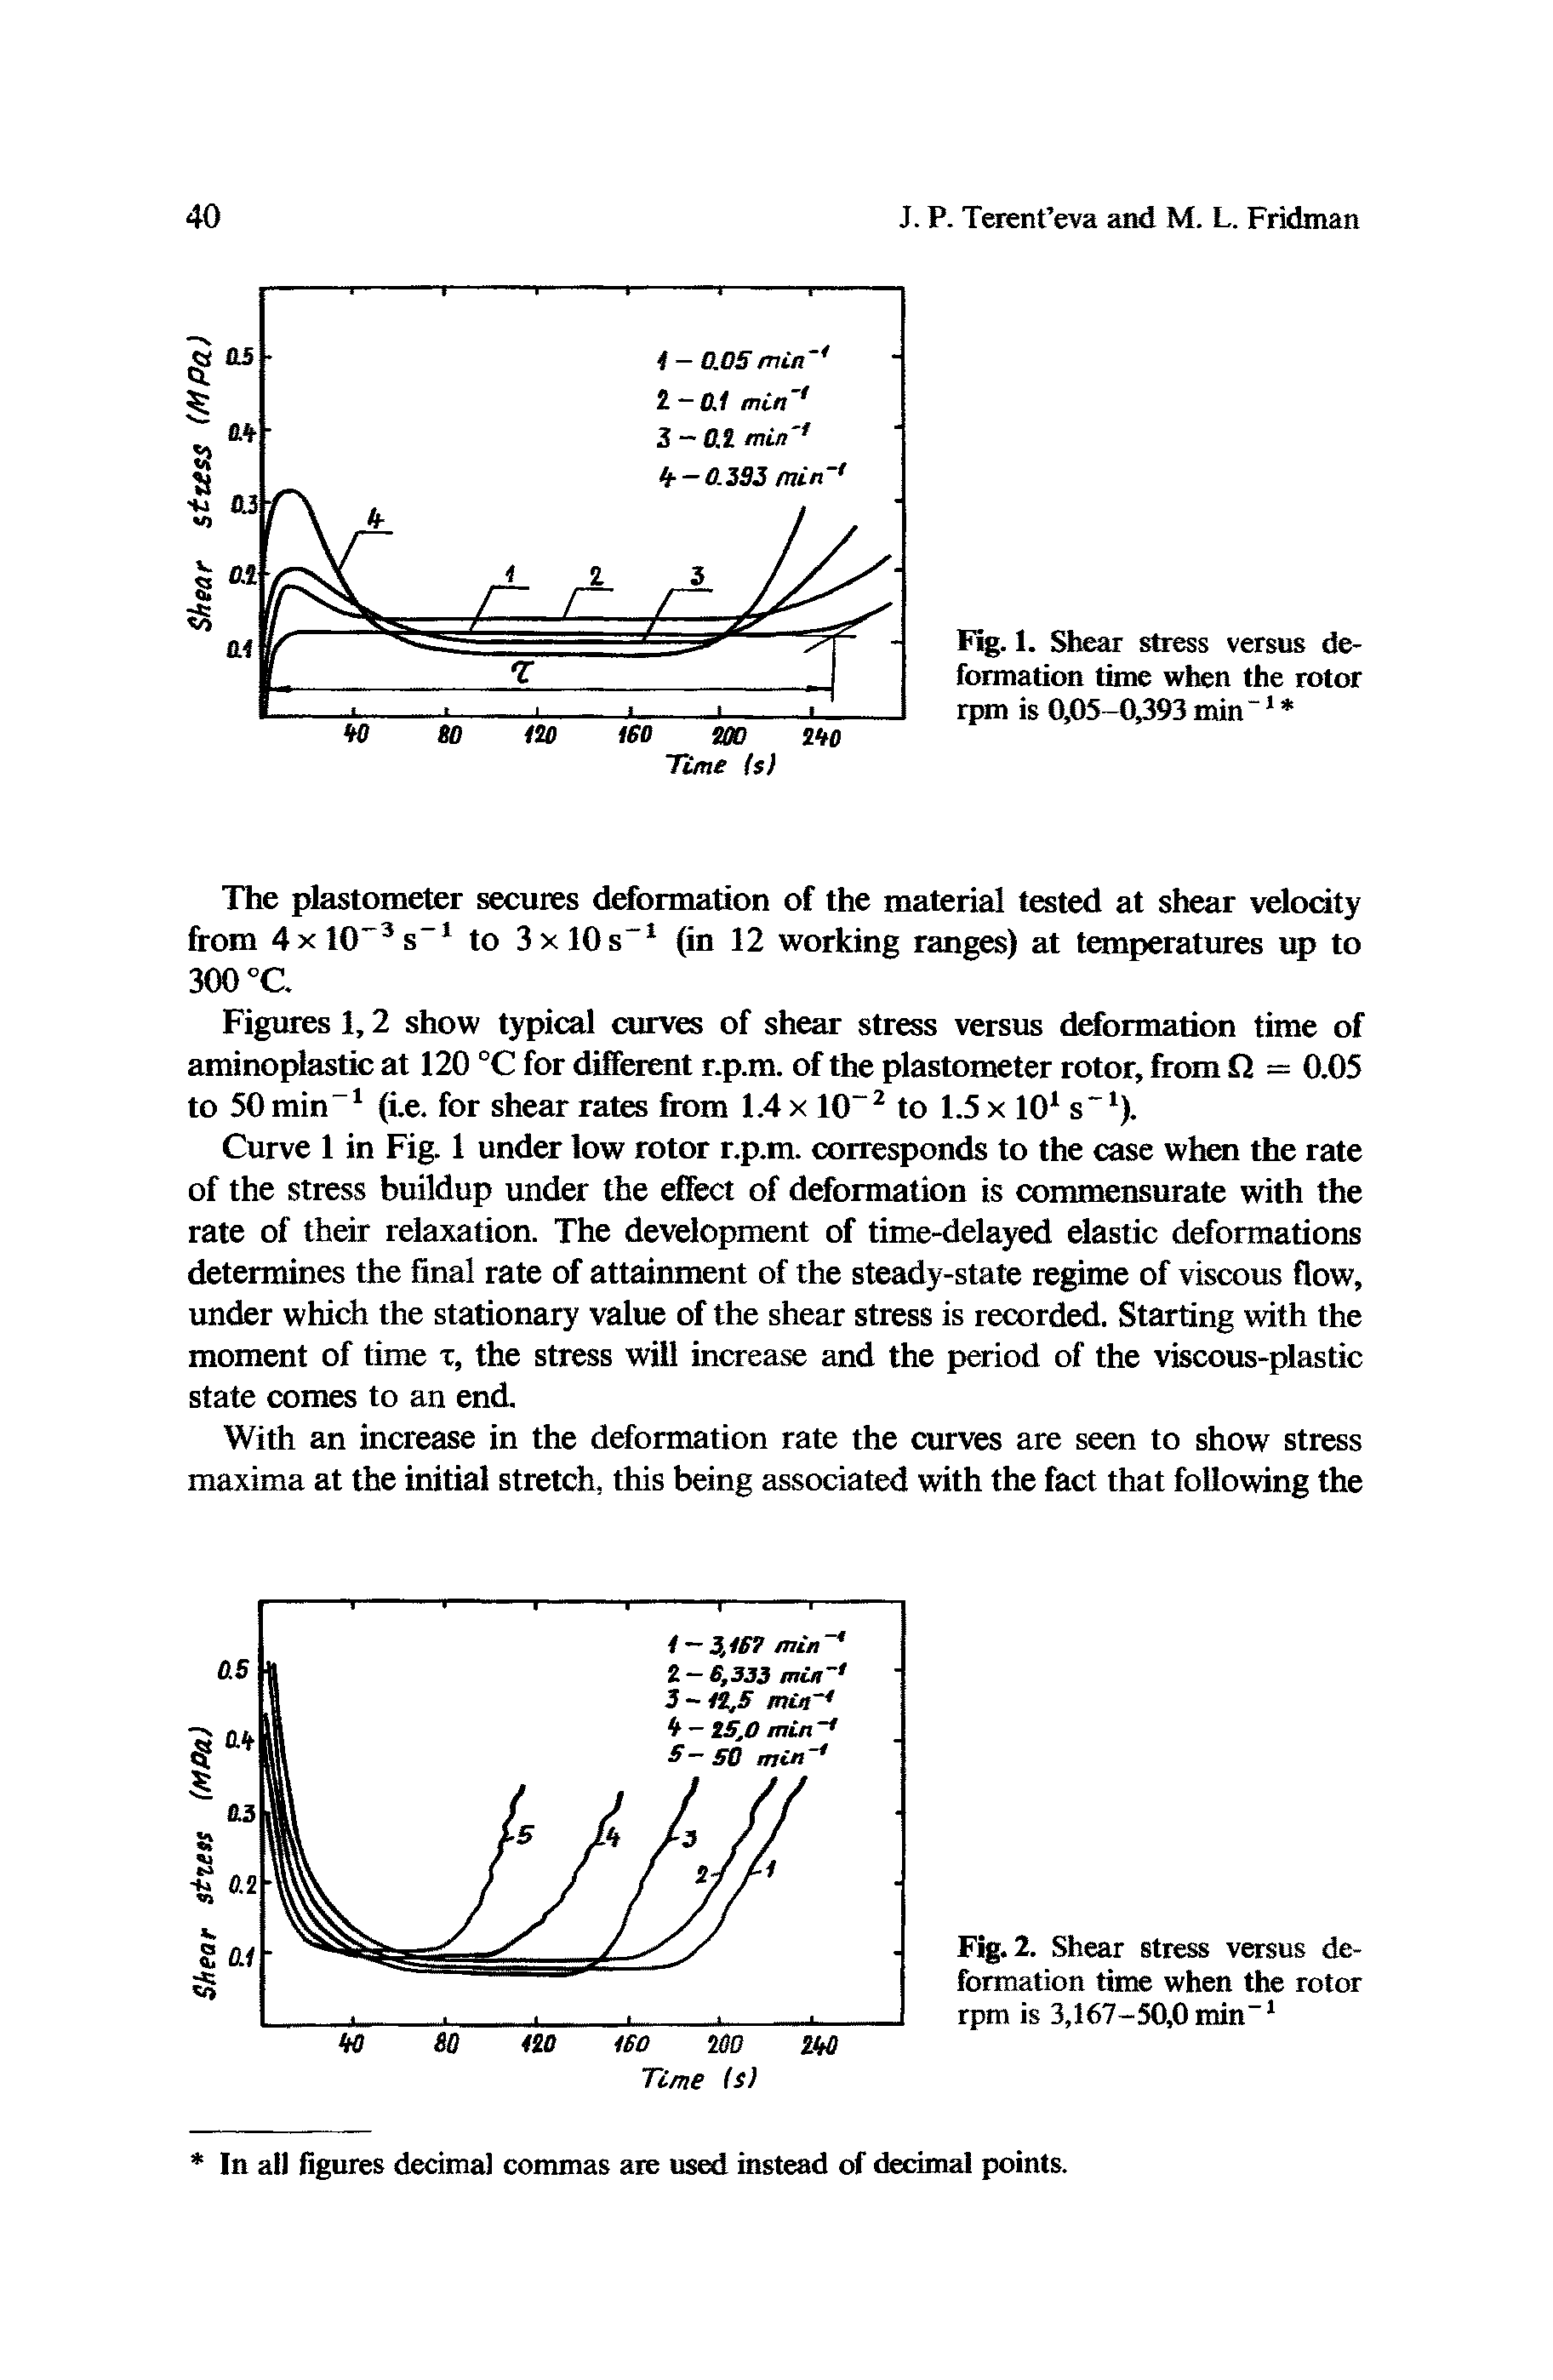 Figures 1,2 show typical curves of shear stress versus deformation time of aminoplastic at 120 °C for different r.p.m. of the plastometer rotor, from 2 = 0.05 to 50 min (i.e. for shear rates from 1.4 x 10 to 1.5 x 10 s ).